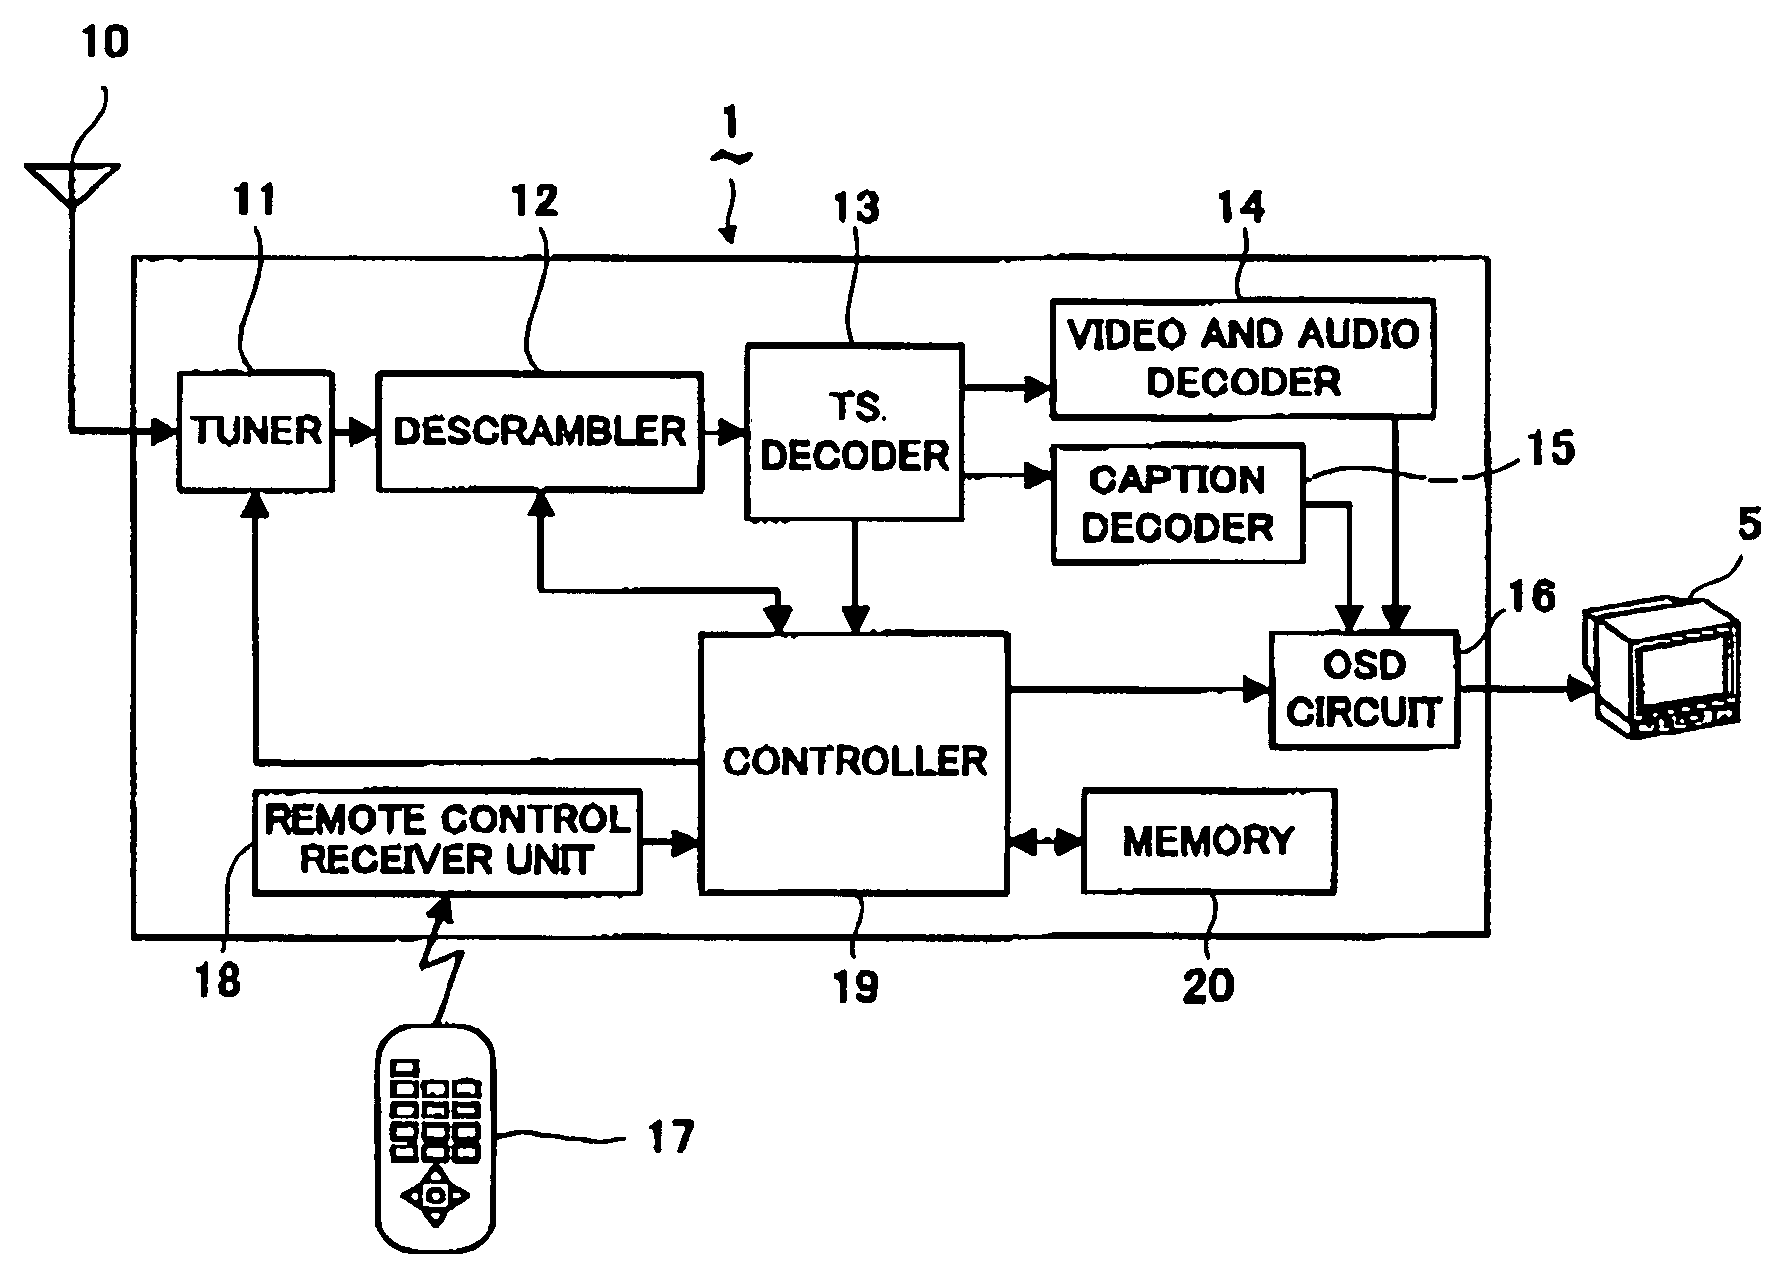 Television broadcast receiver with caption display capability using parameter setting images